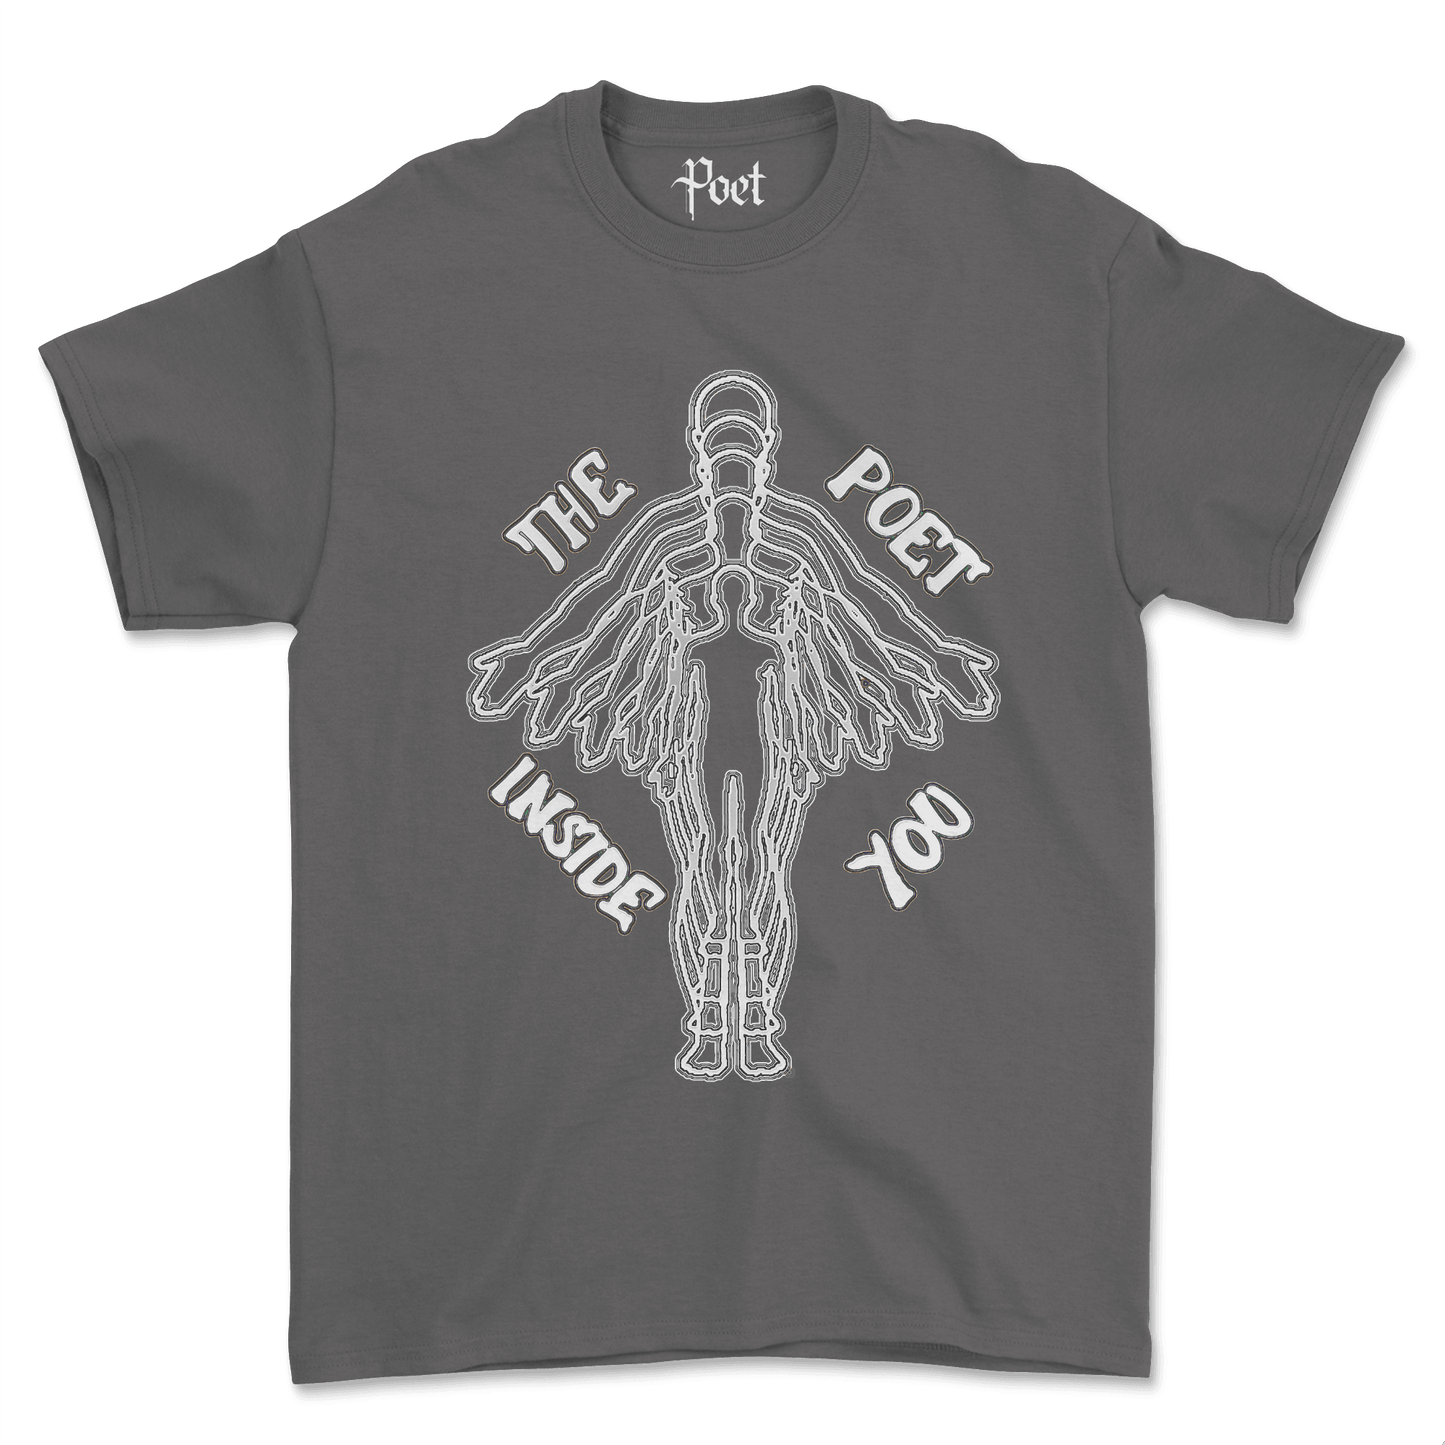 The Poet Inside You T-Shirt - Poet Archives